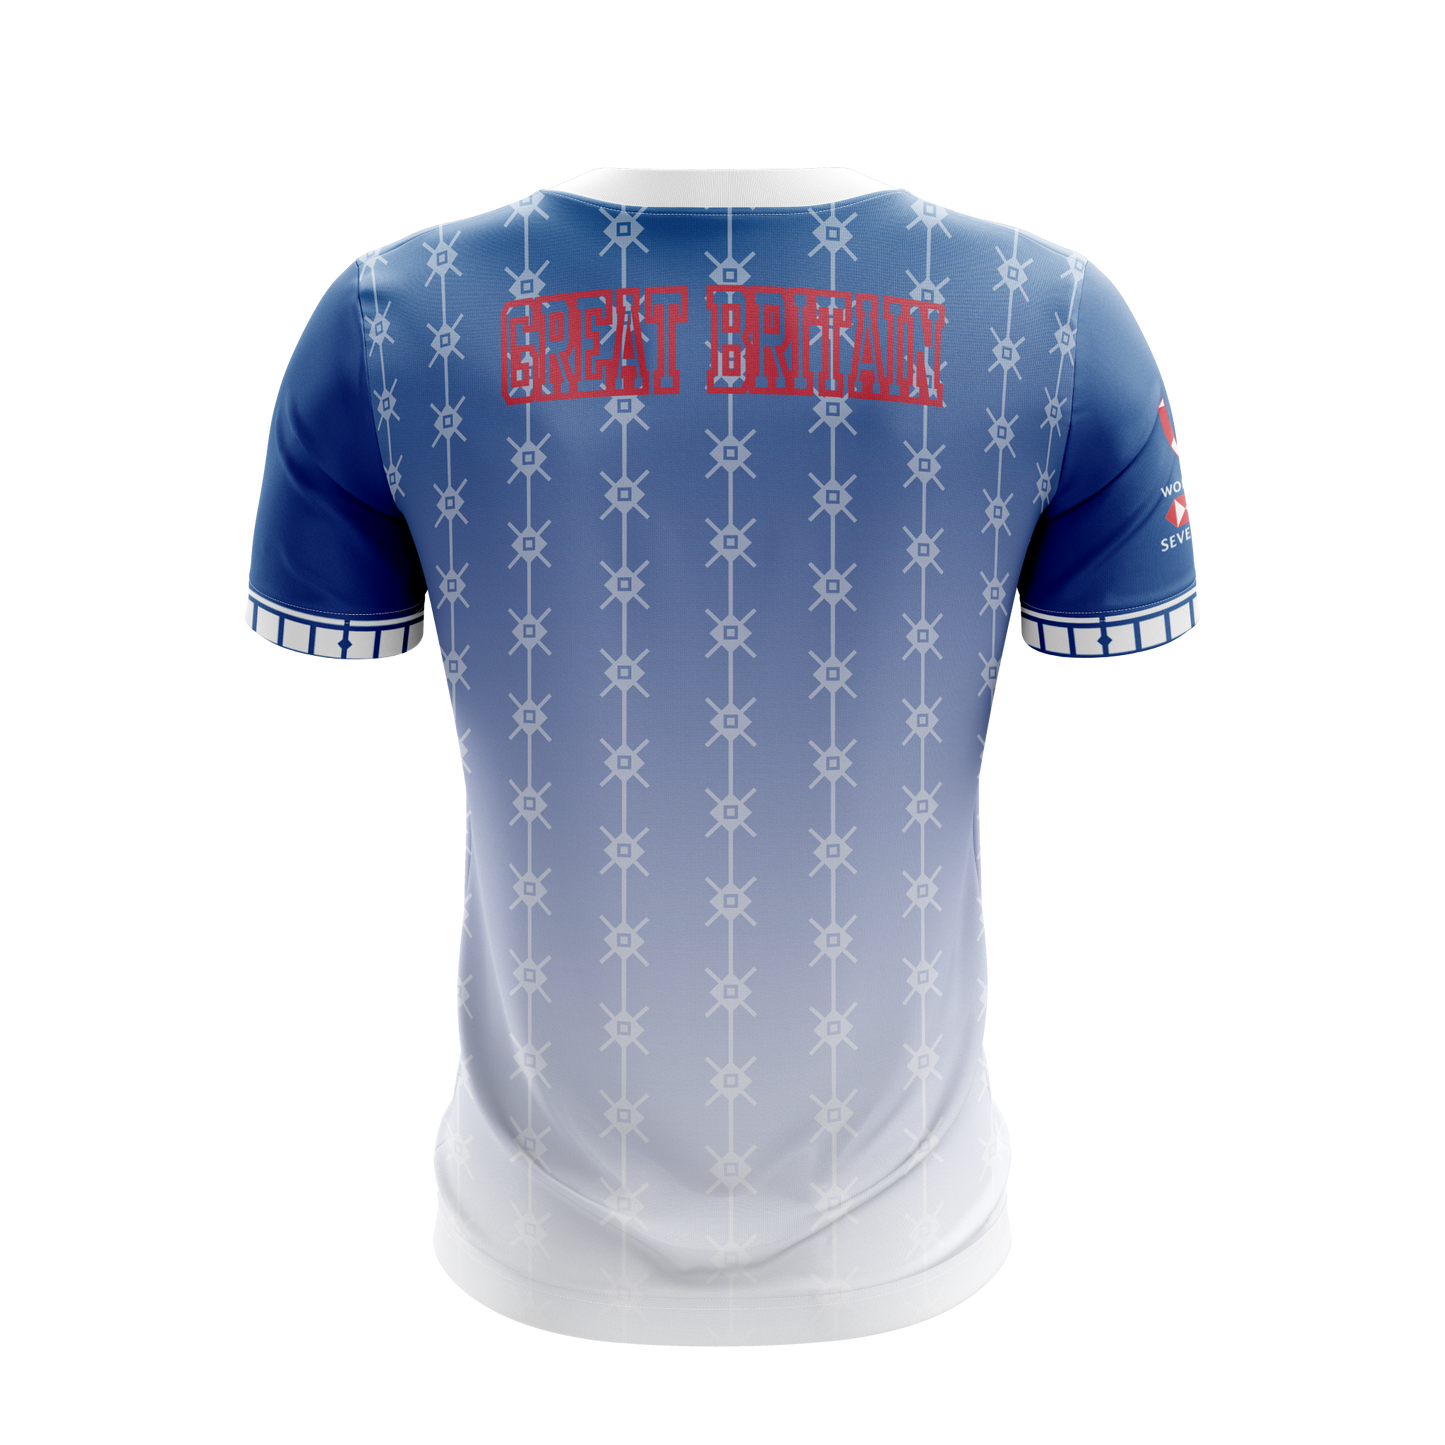 HSBC 7s GREAT BRITAIN ATHLETIC JERSEY